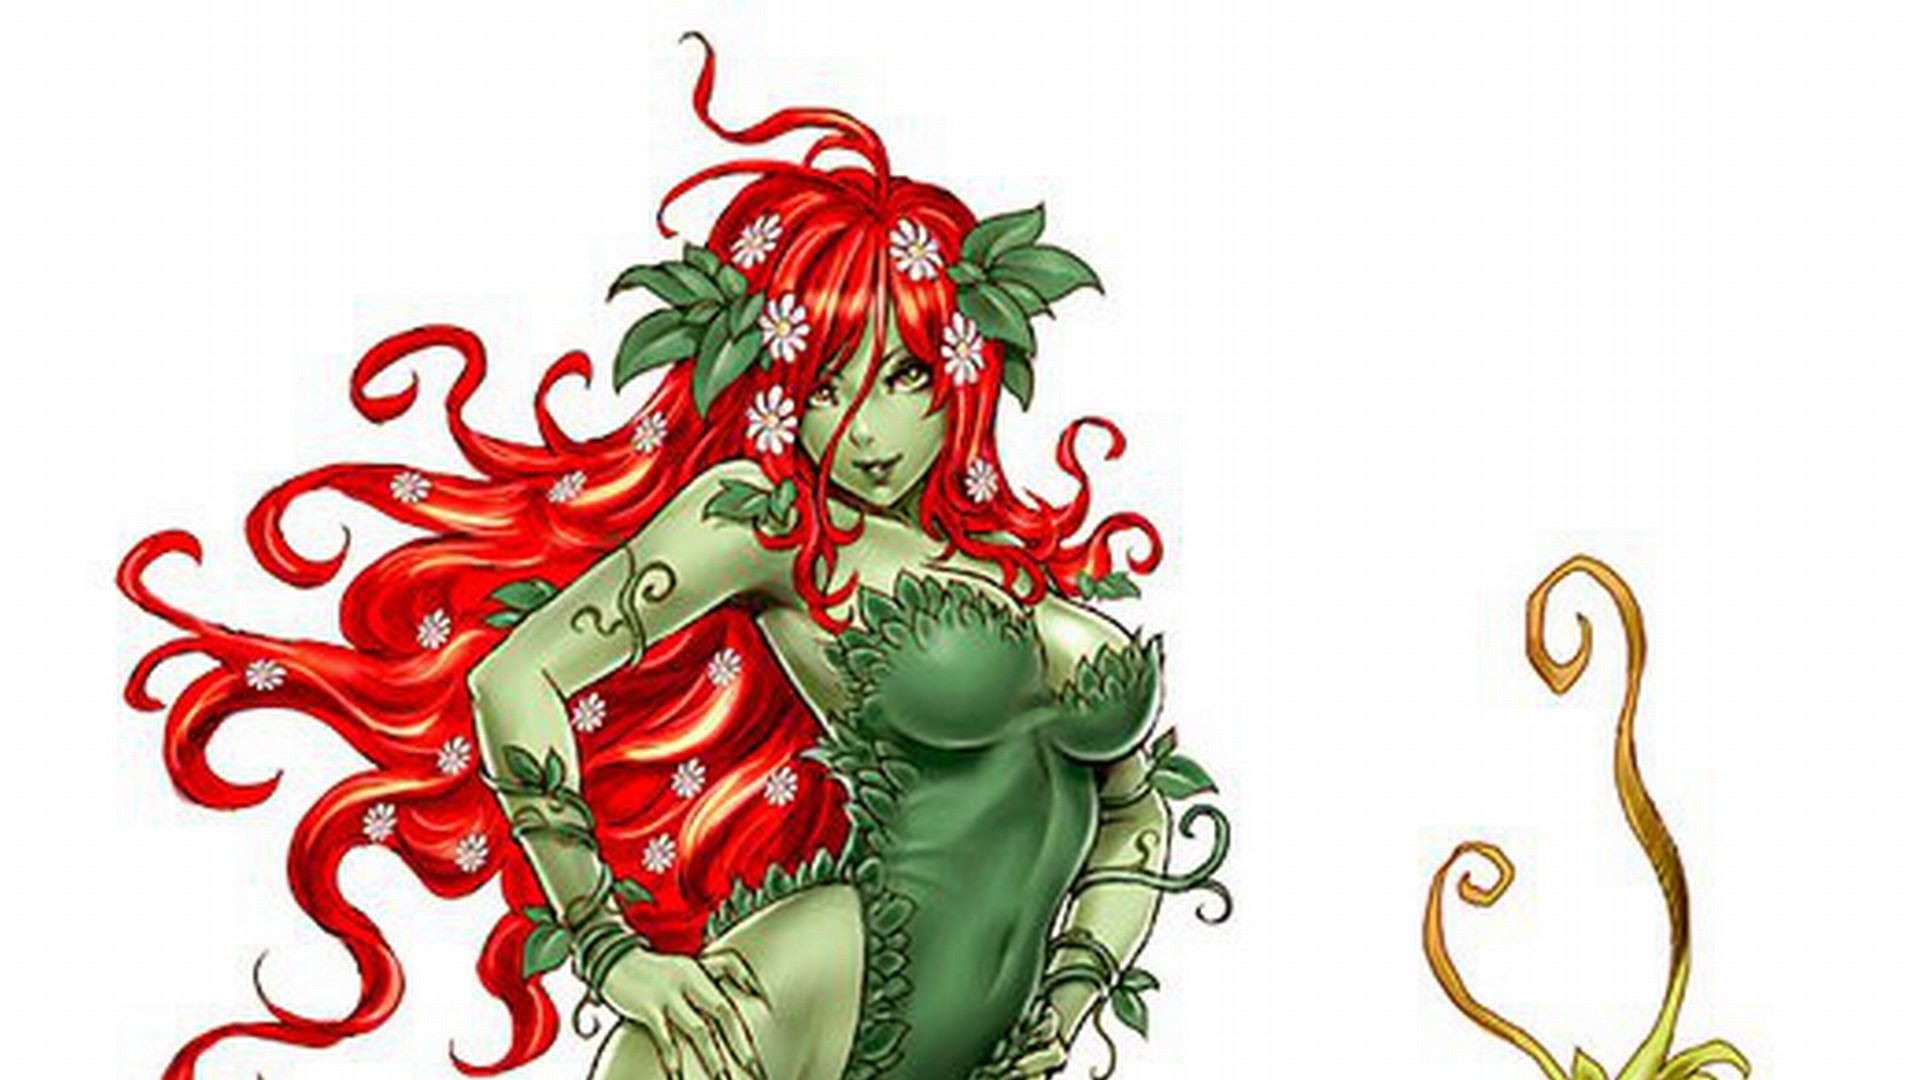 1920x1080 Awesome poison ivy image,  (265 kB)